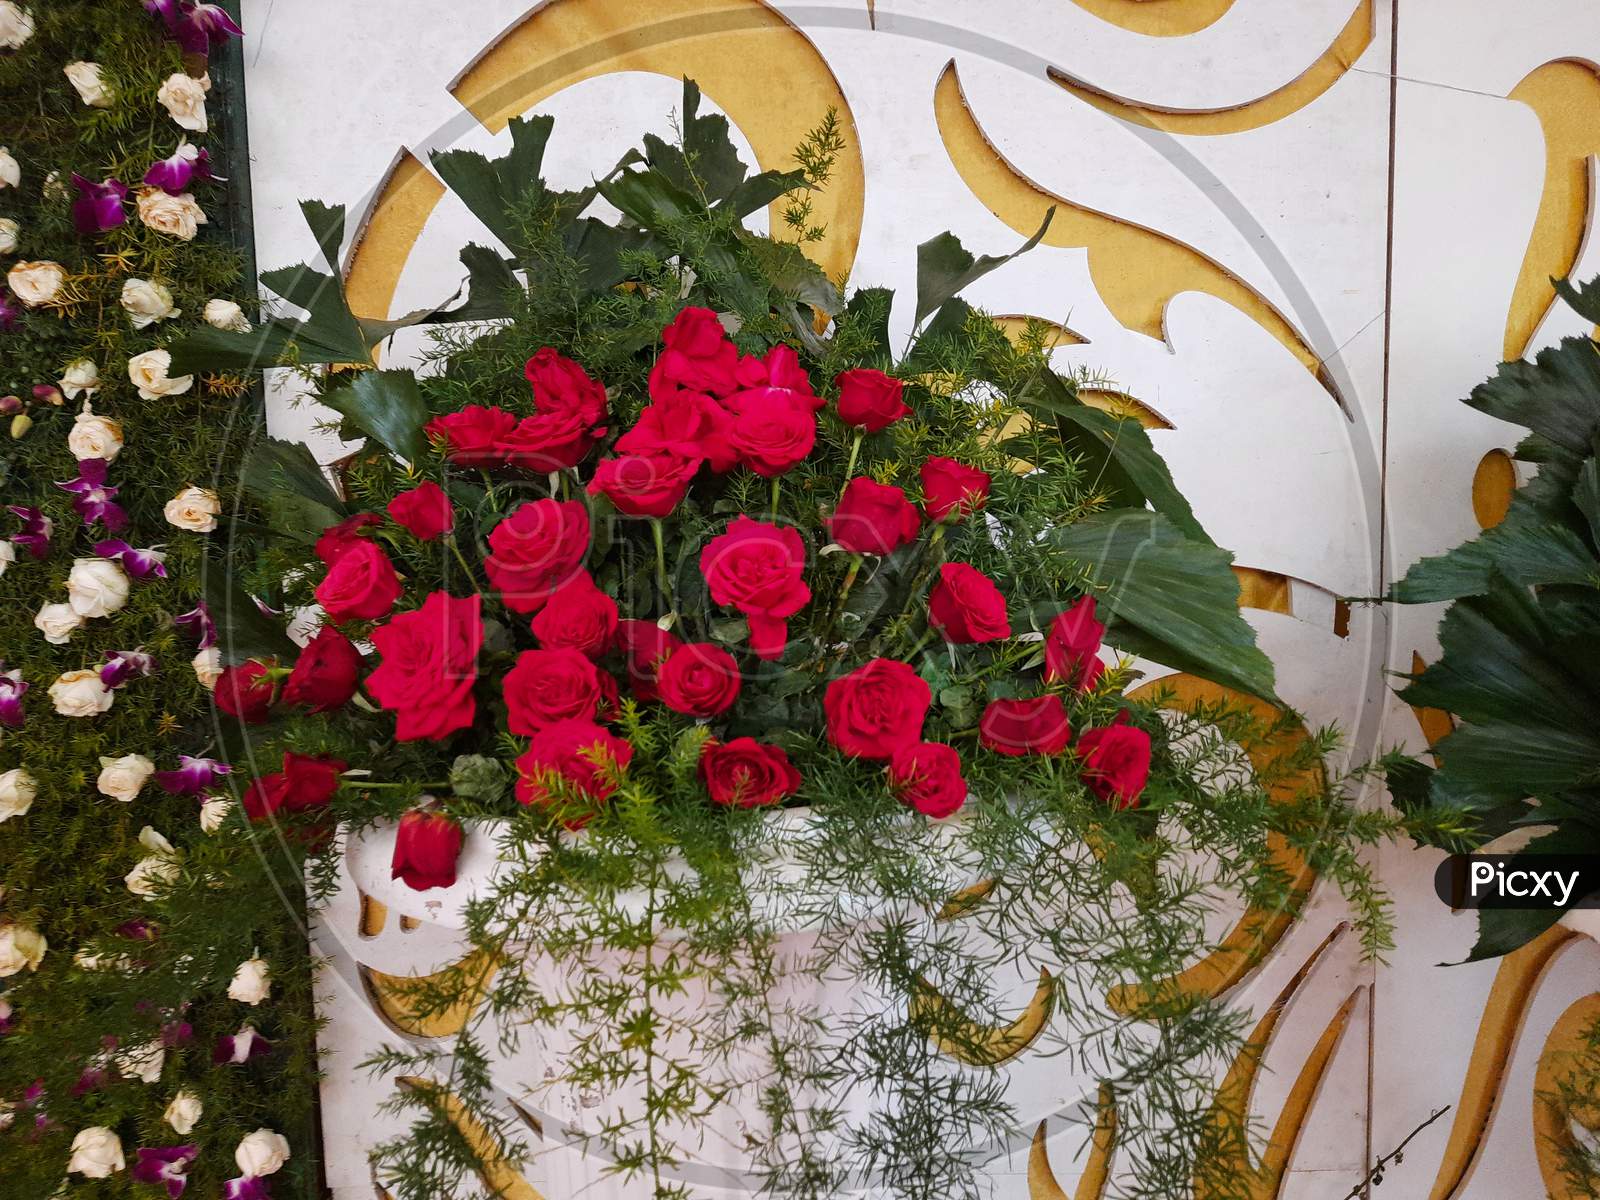 Flower Bouquet Used For The Decoration Of Marriage Hall Or Kalyana Mantapa During Wedding